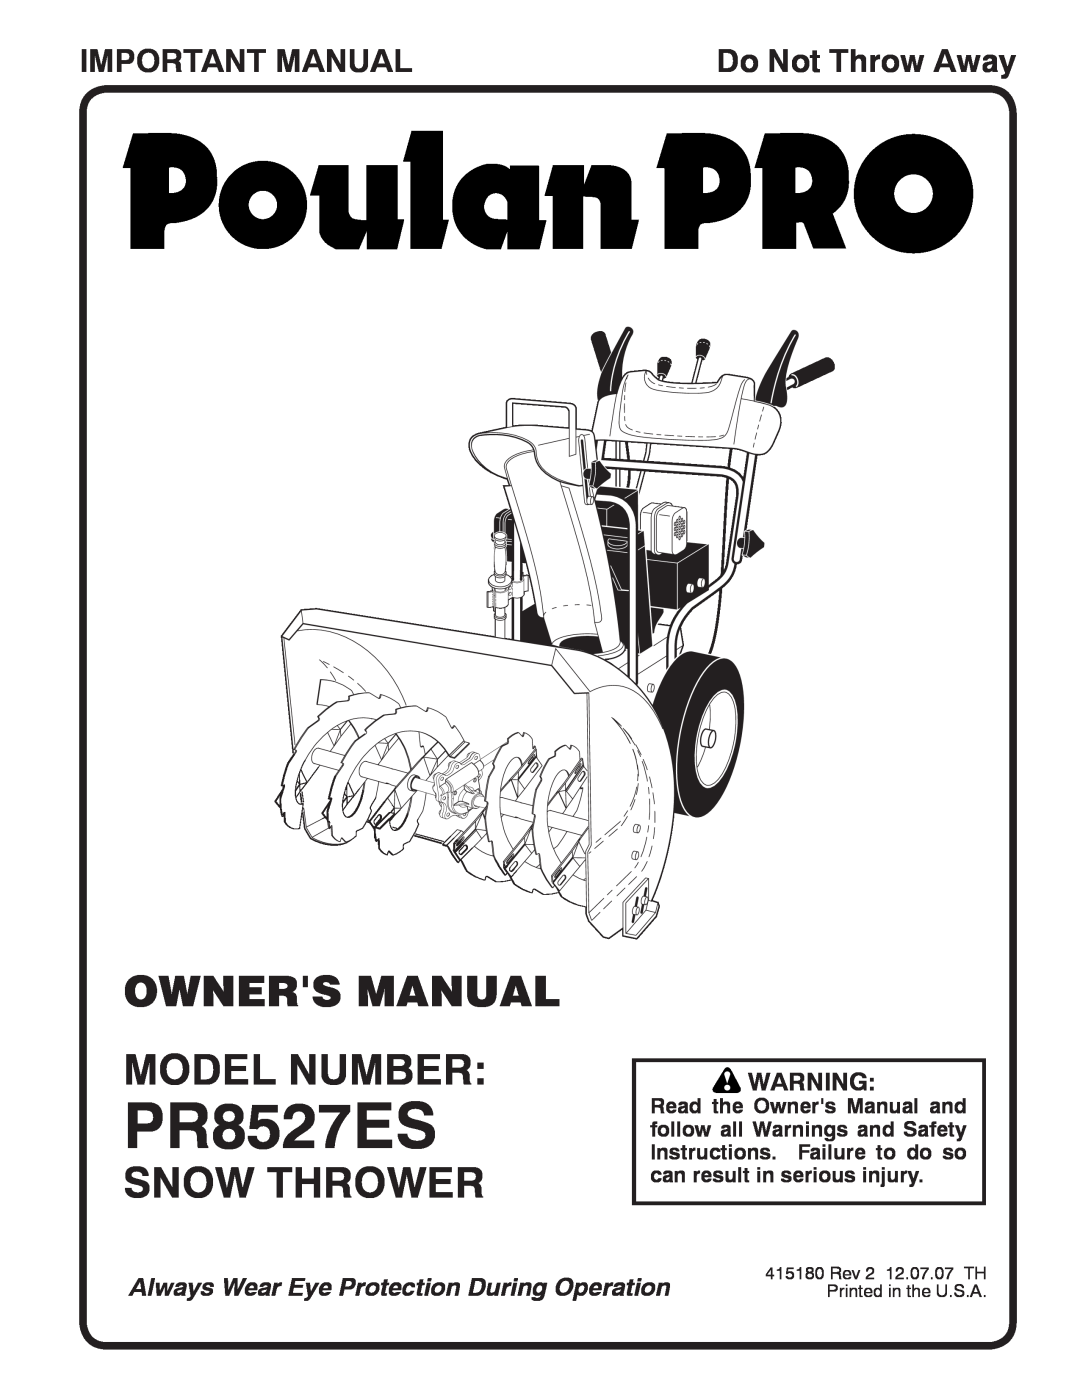 Poulan 415180 owner manual Owners Manual Model Number, Snow Thrower, Important Manual, PR8527ES, Do Not Throw Away 